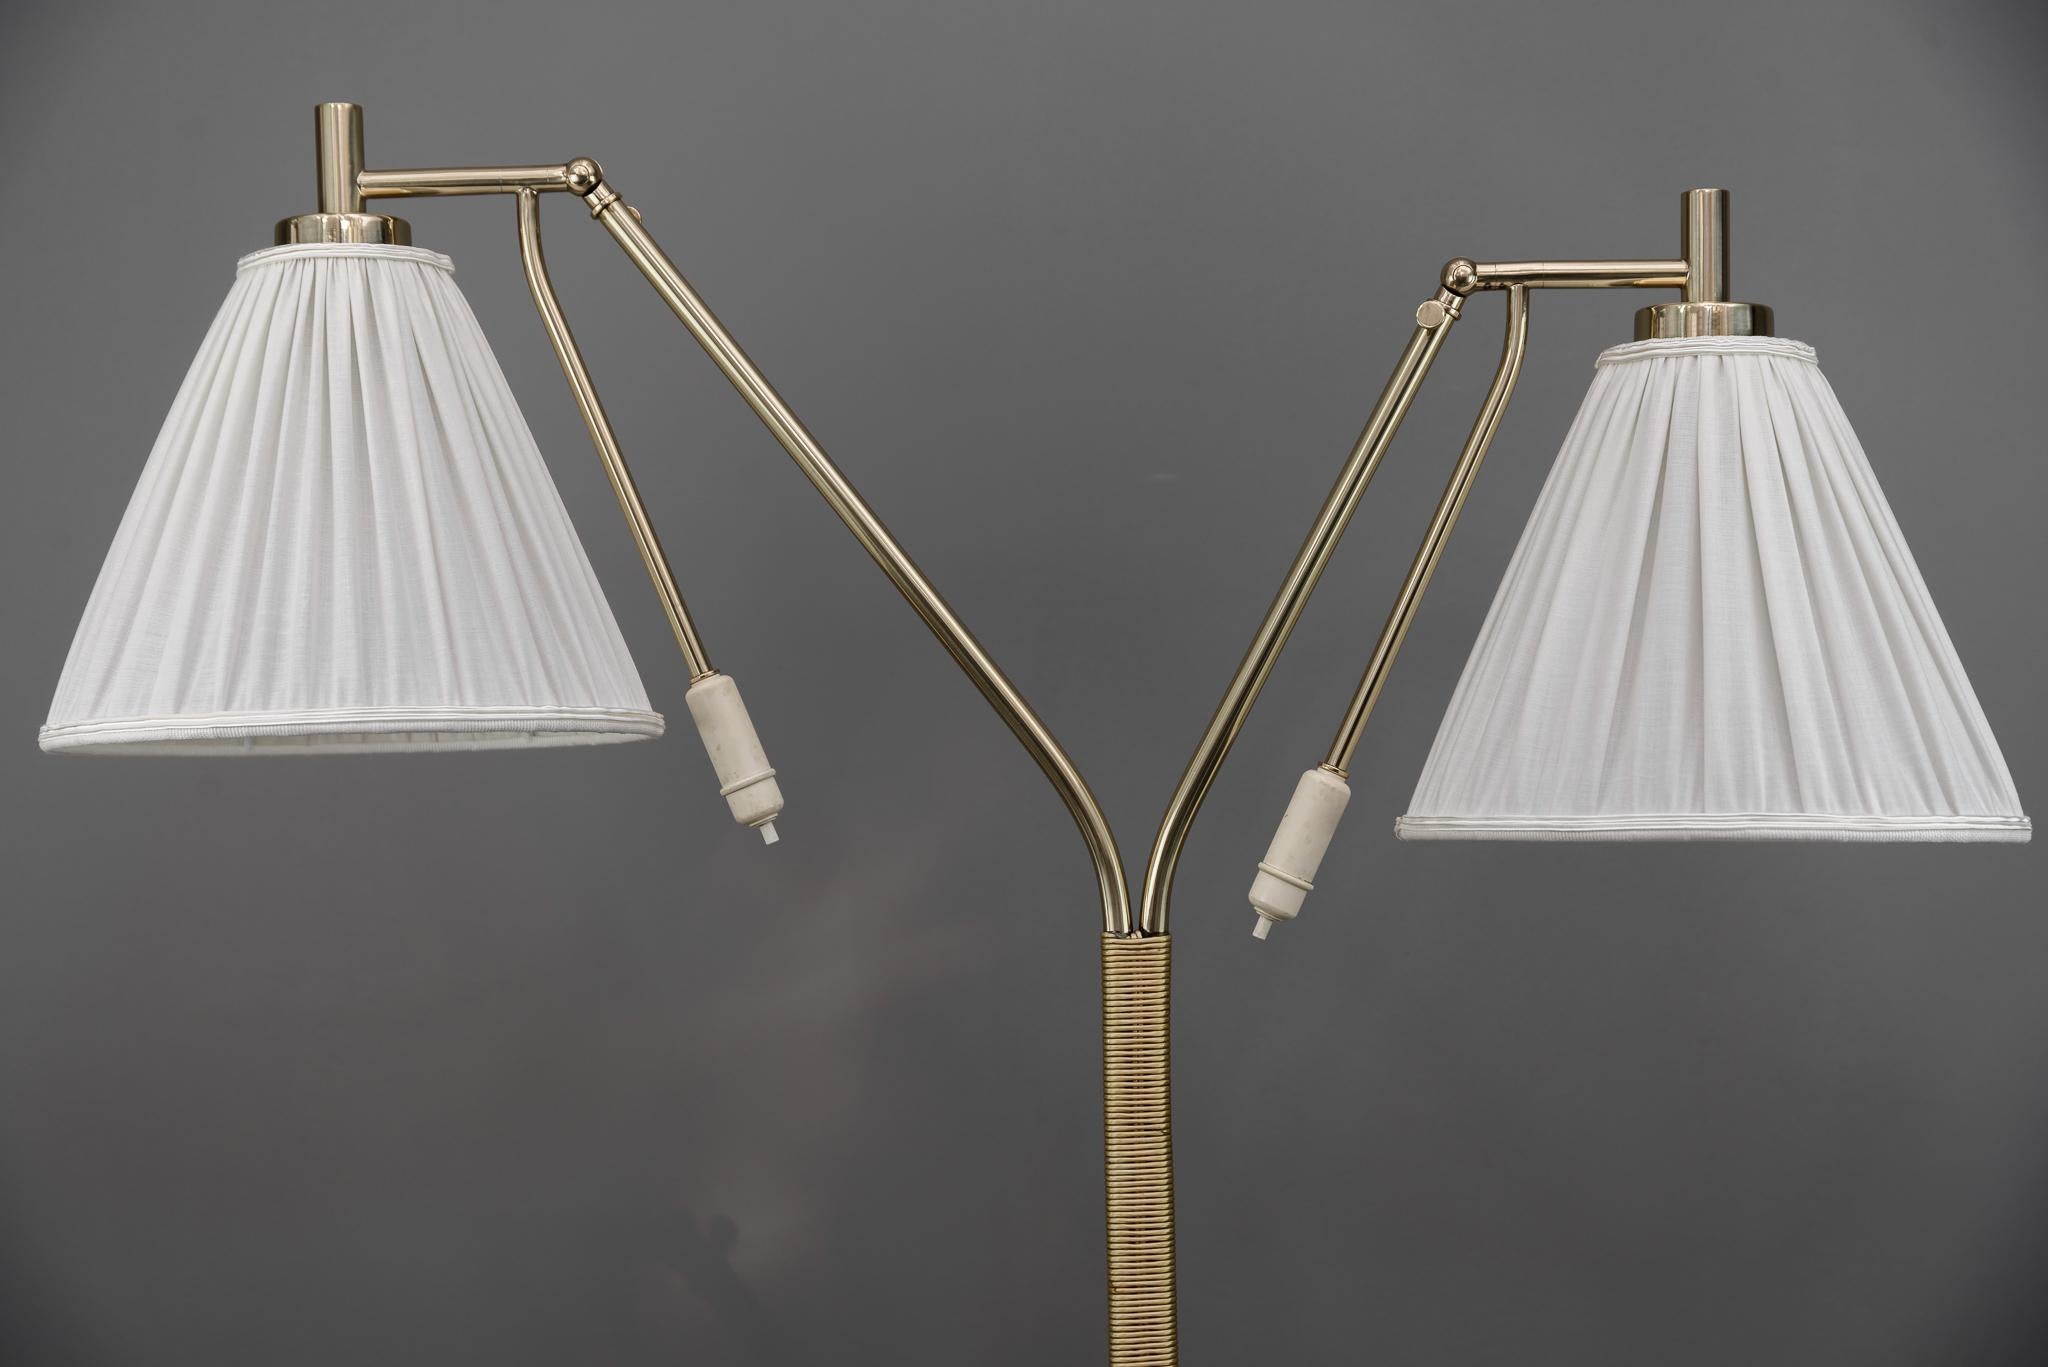 Rupert Nikoll floor lamp, circa 1950s
Can be turned on and adjusted separately.